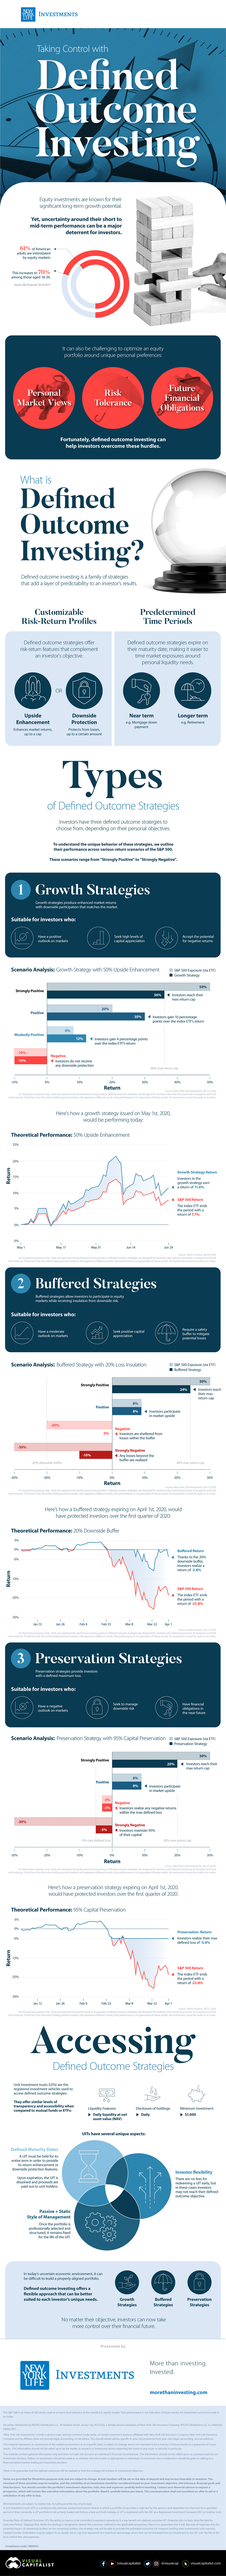 Defined Outcome Investing Infographic